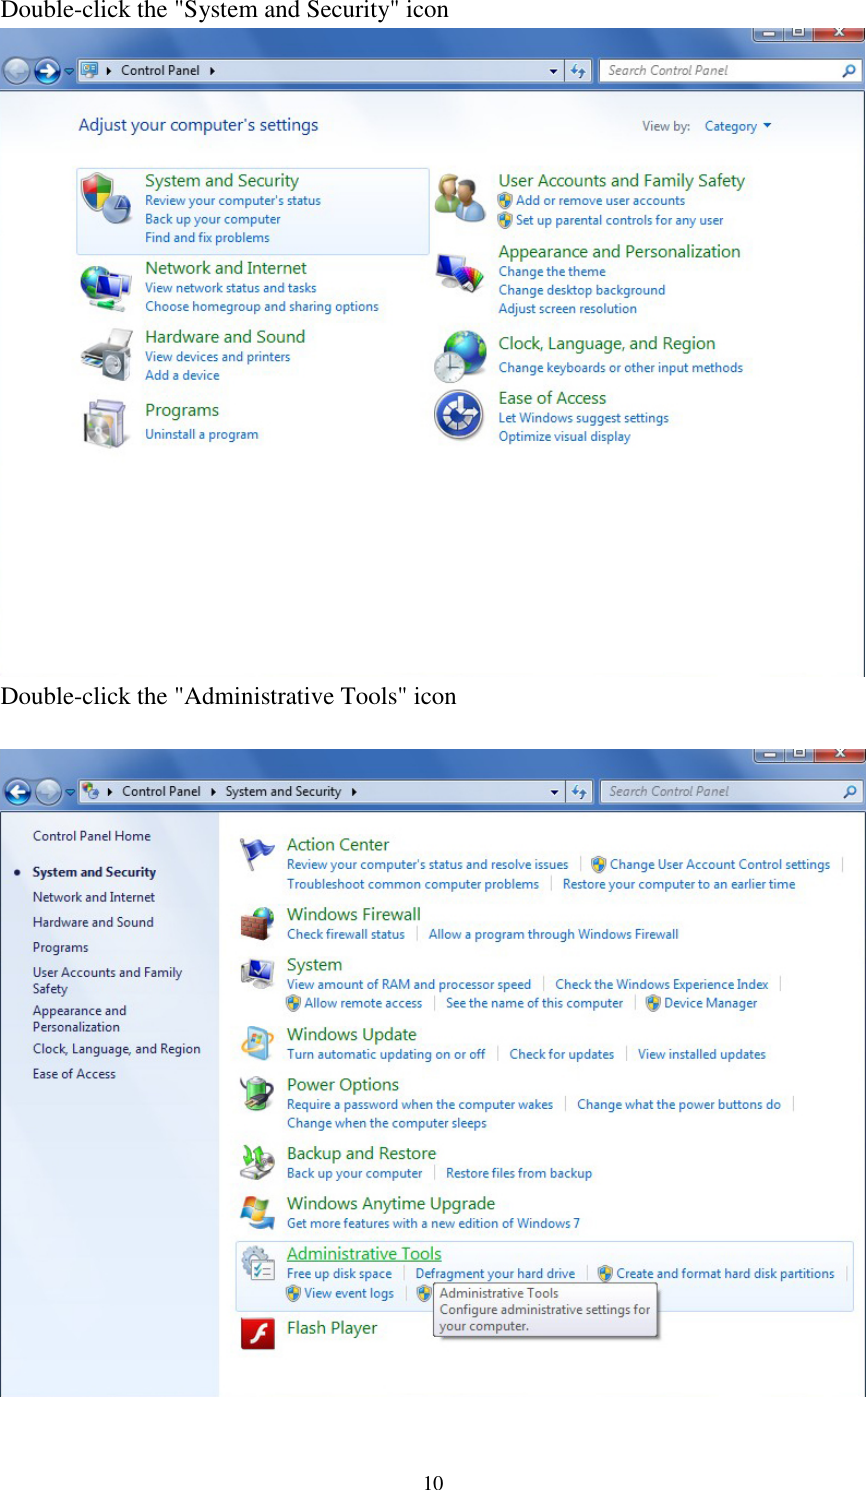 10Double-click the &quot;System and Security&quot; iconDouble-click the &quot;Administrative Tools&quot; icon